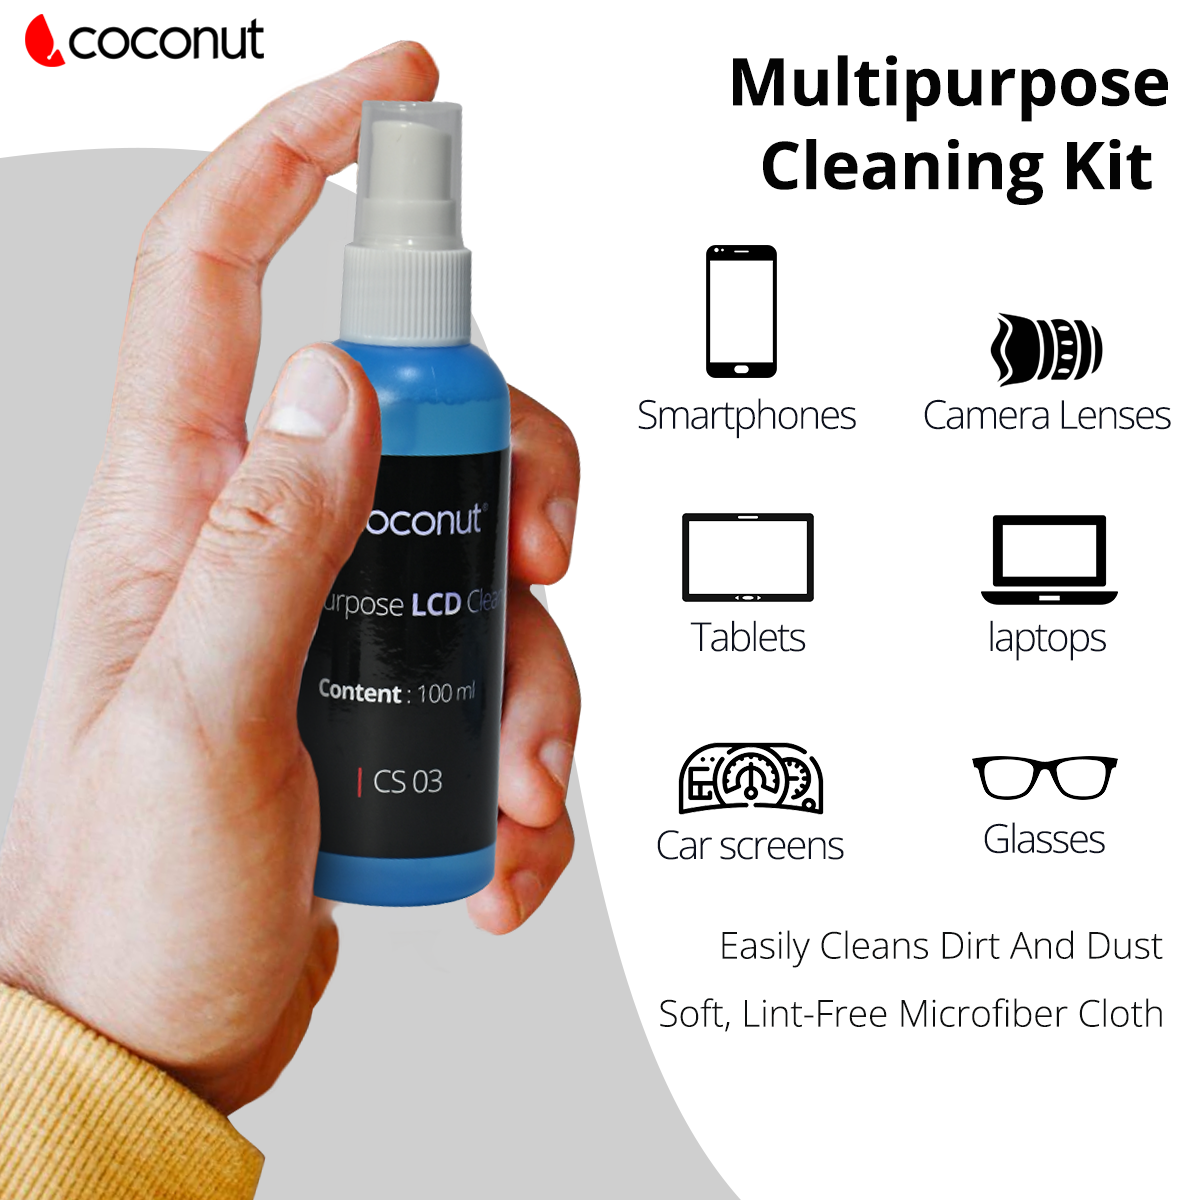 CS03 - 4 in 1 Cleaning Kit